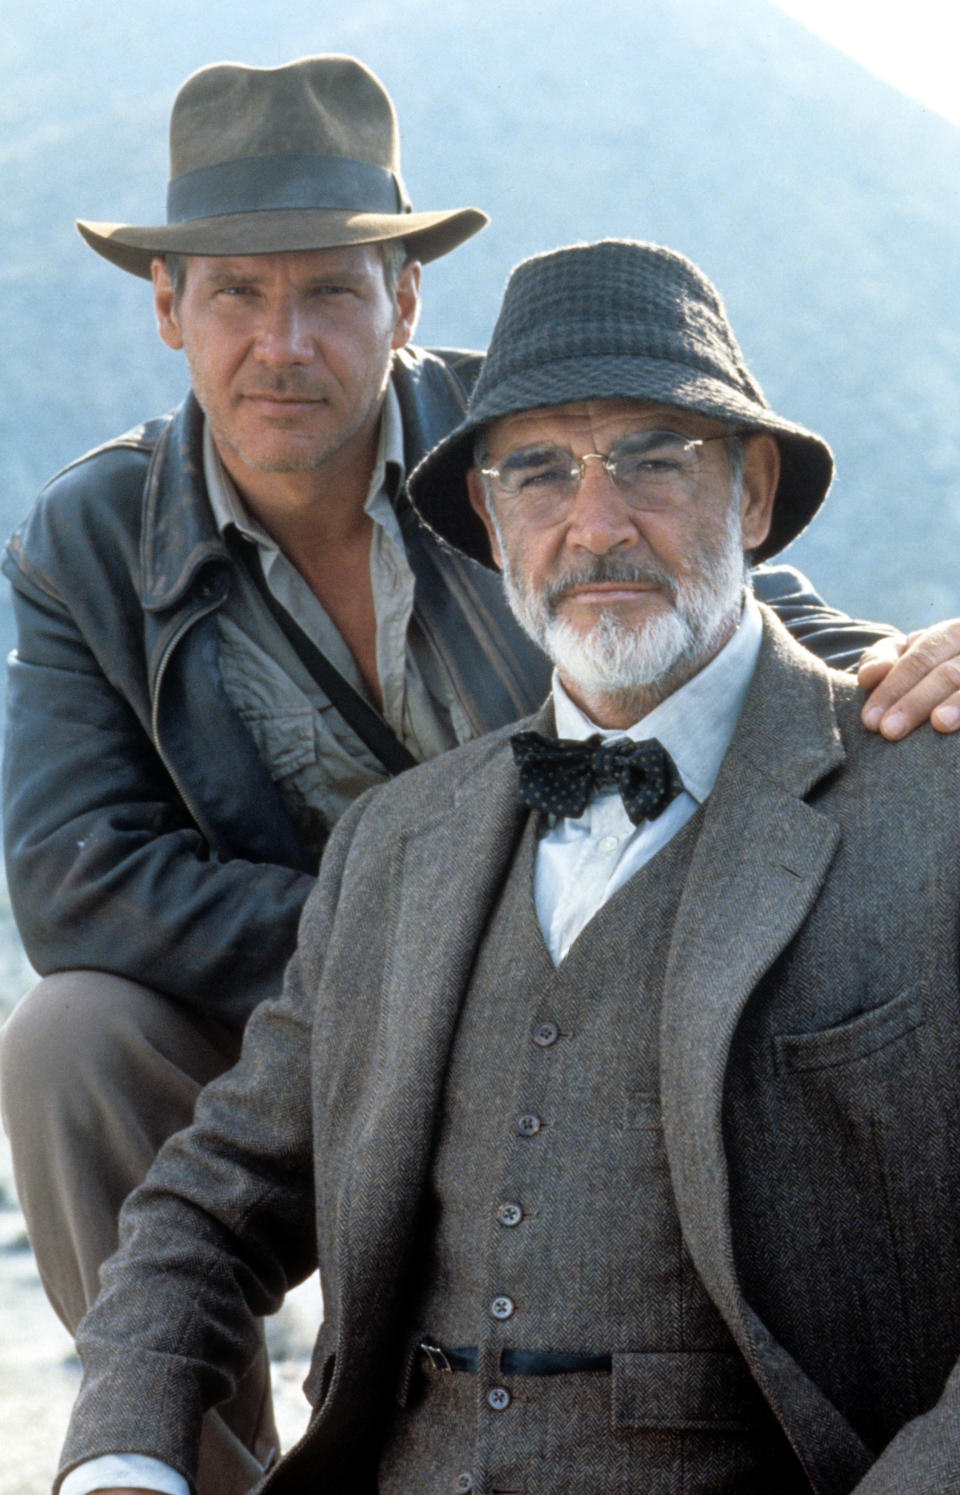 Harrison Ford and Sean Connery on set of the film 'Indiana Jones And The Last Crusade', 1989. (Photo by Paramount/Getty Images)